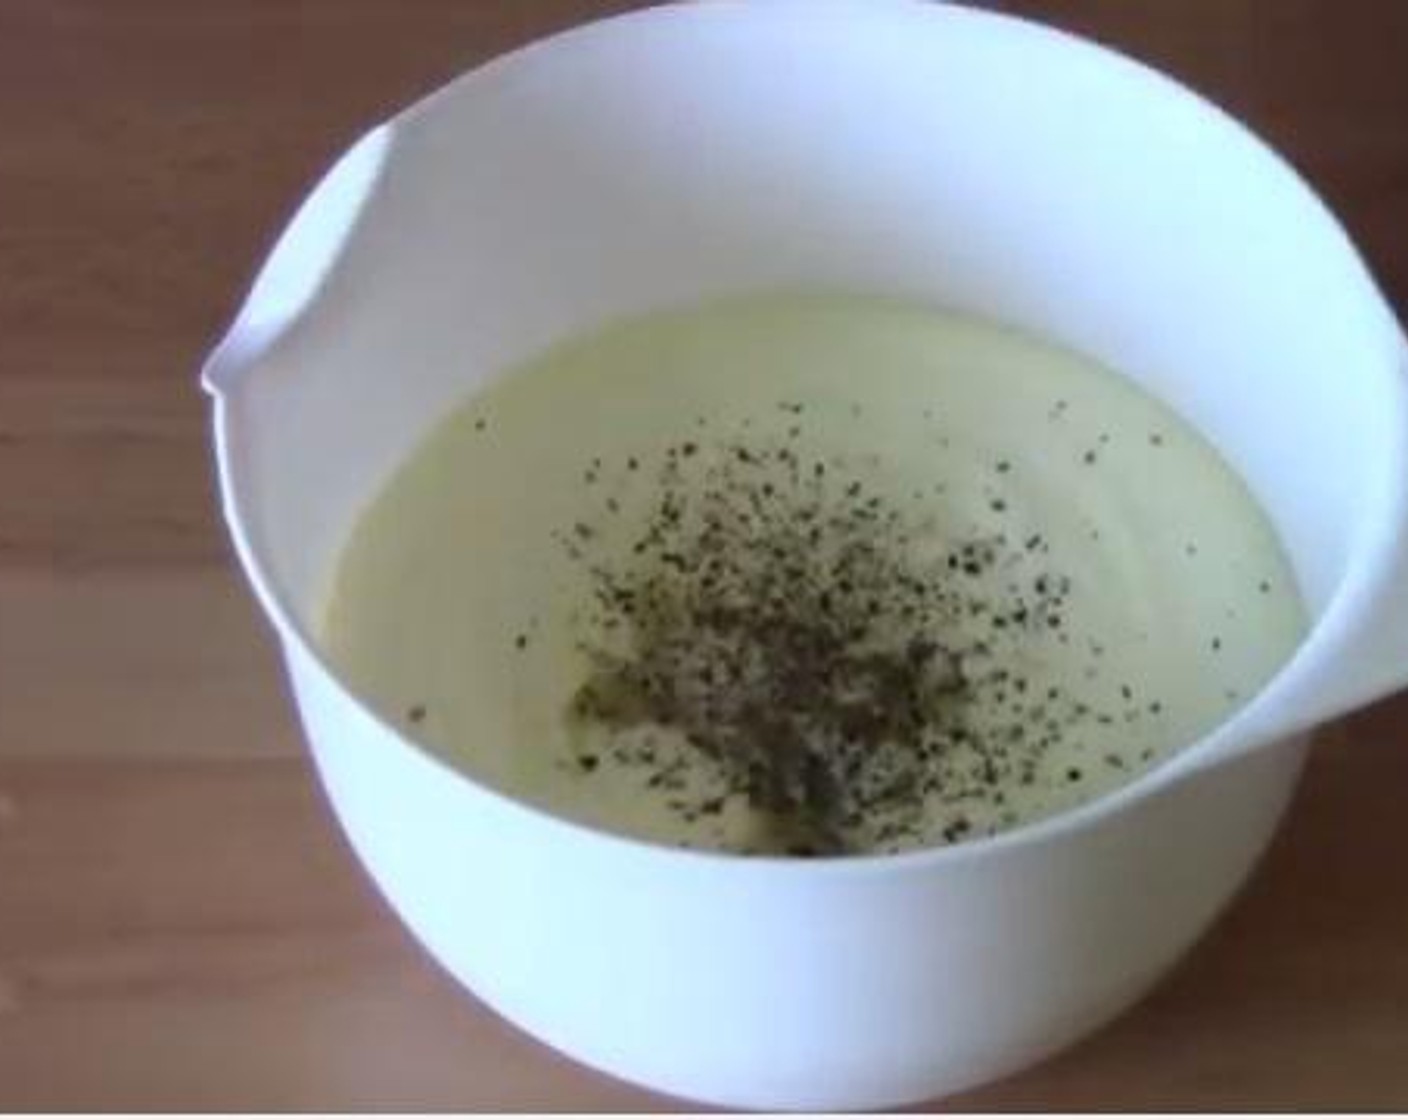 step 1 Into a small mixing bowl, mix together the Cream (2 cups), Chicken Stock (1/2 cup), Salt (to taste) and Ground Black Pepper (to taste).